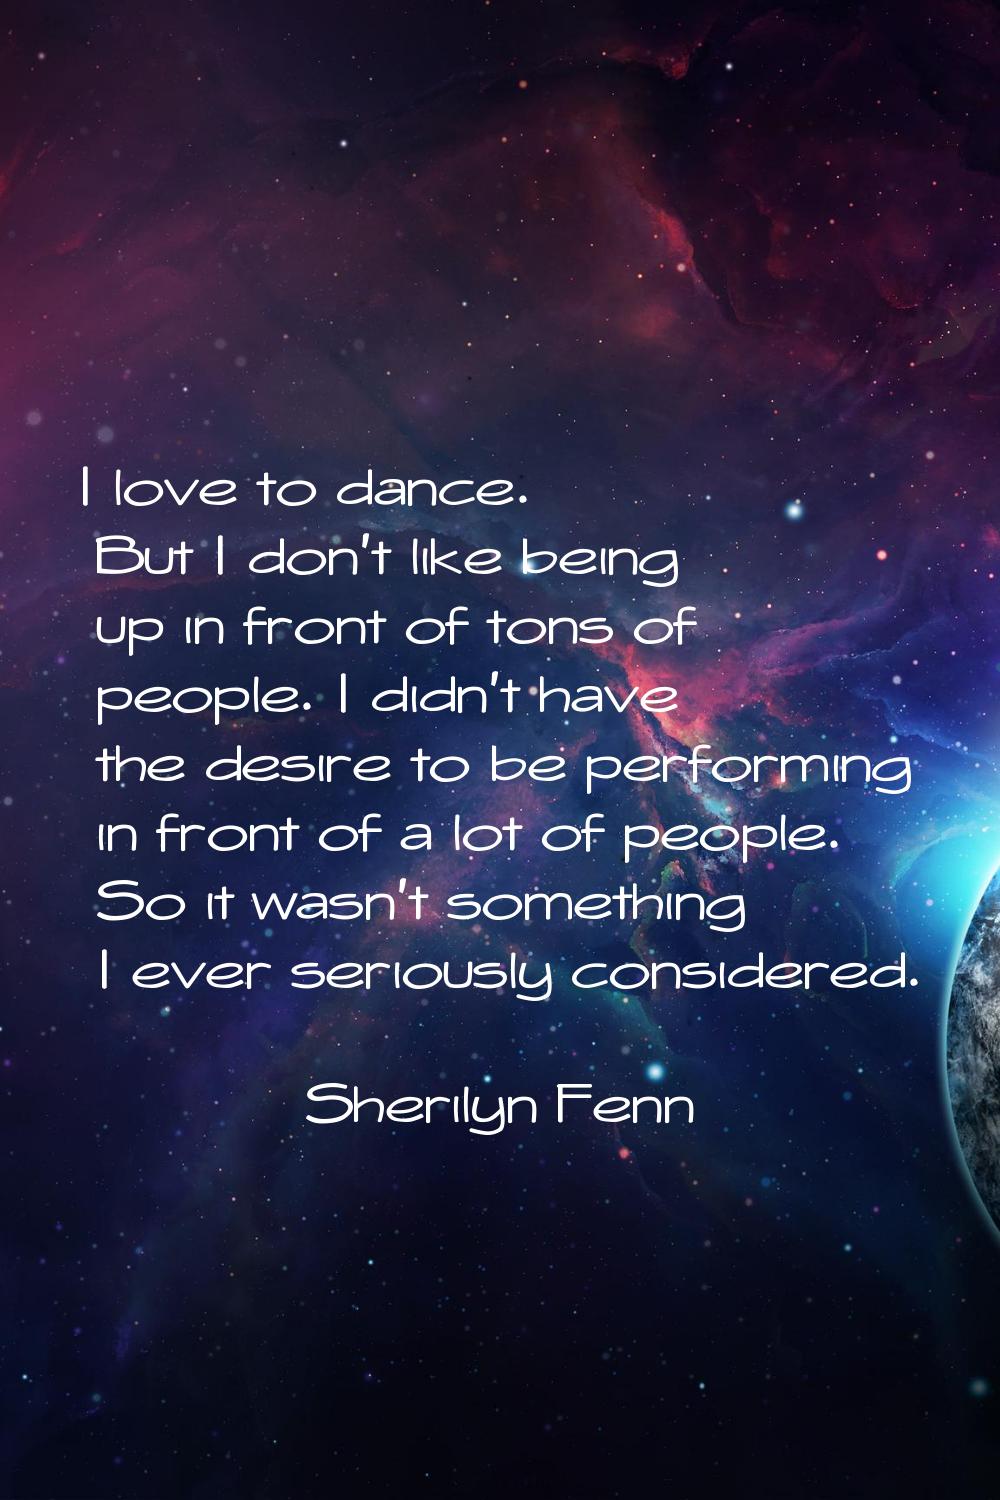 I love to dance. But I don't like being up in front of tons of people. I didn't have the desire to 